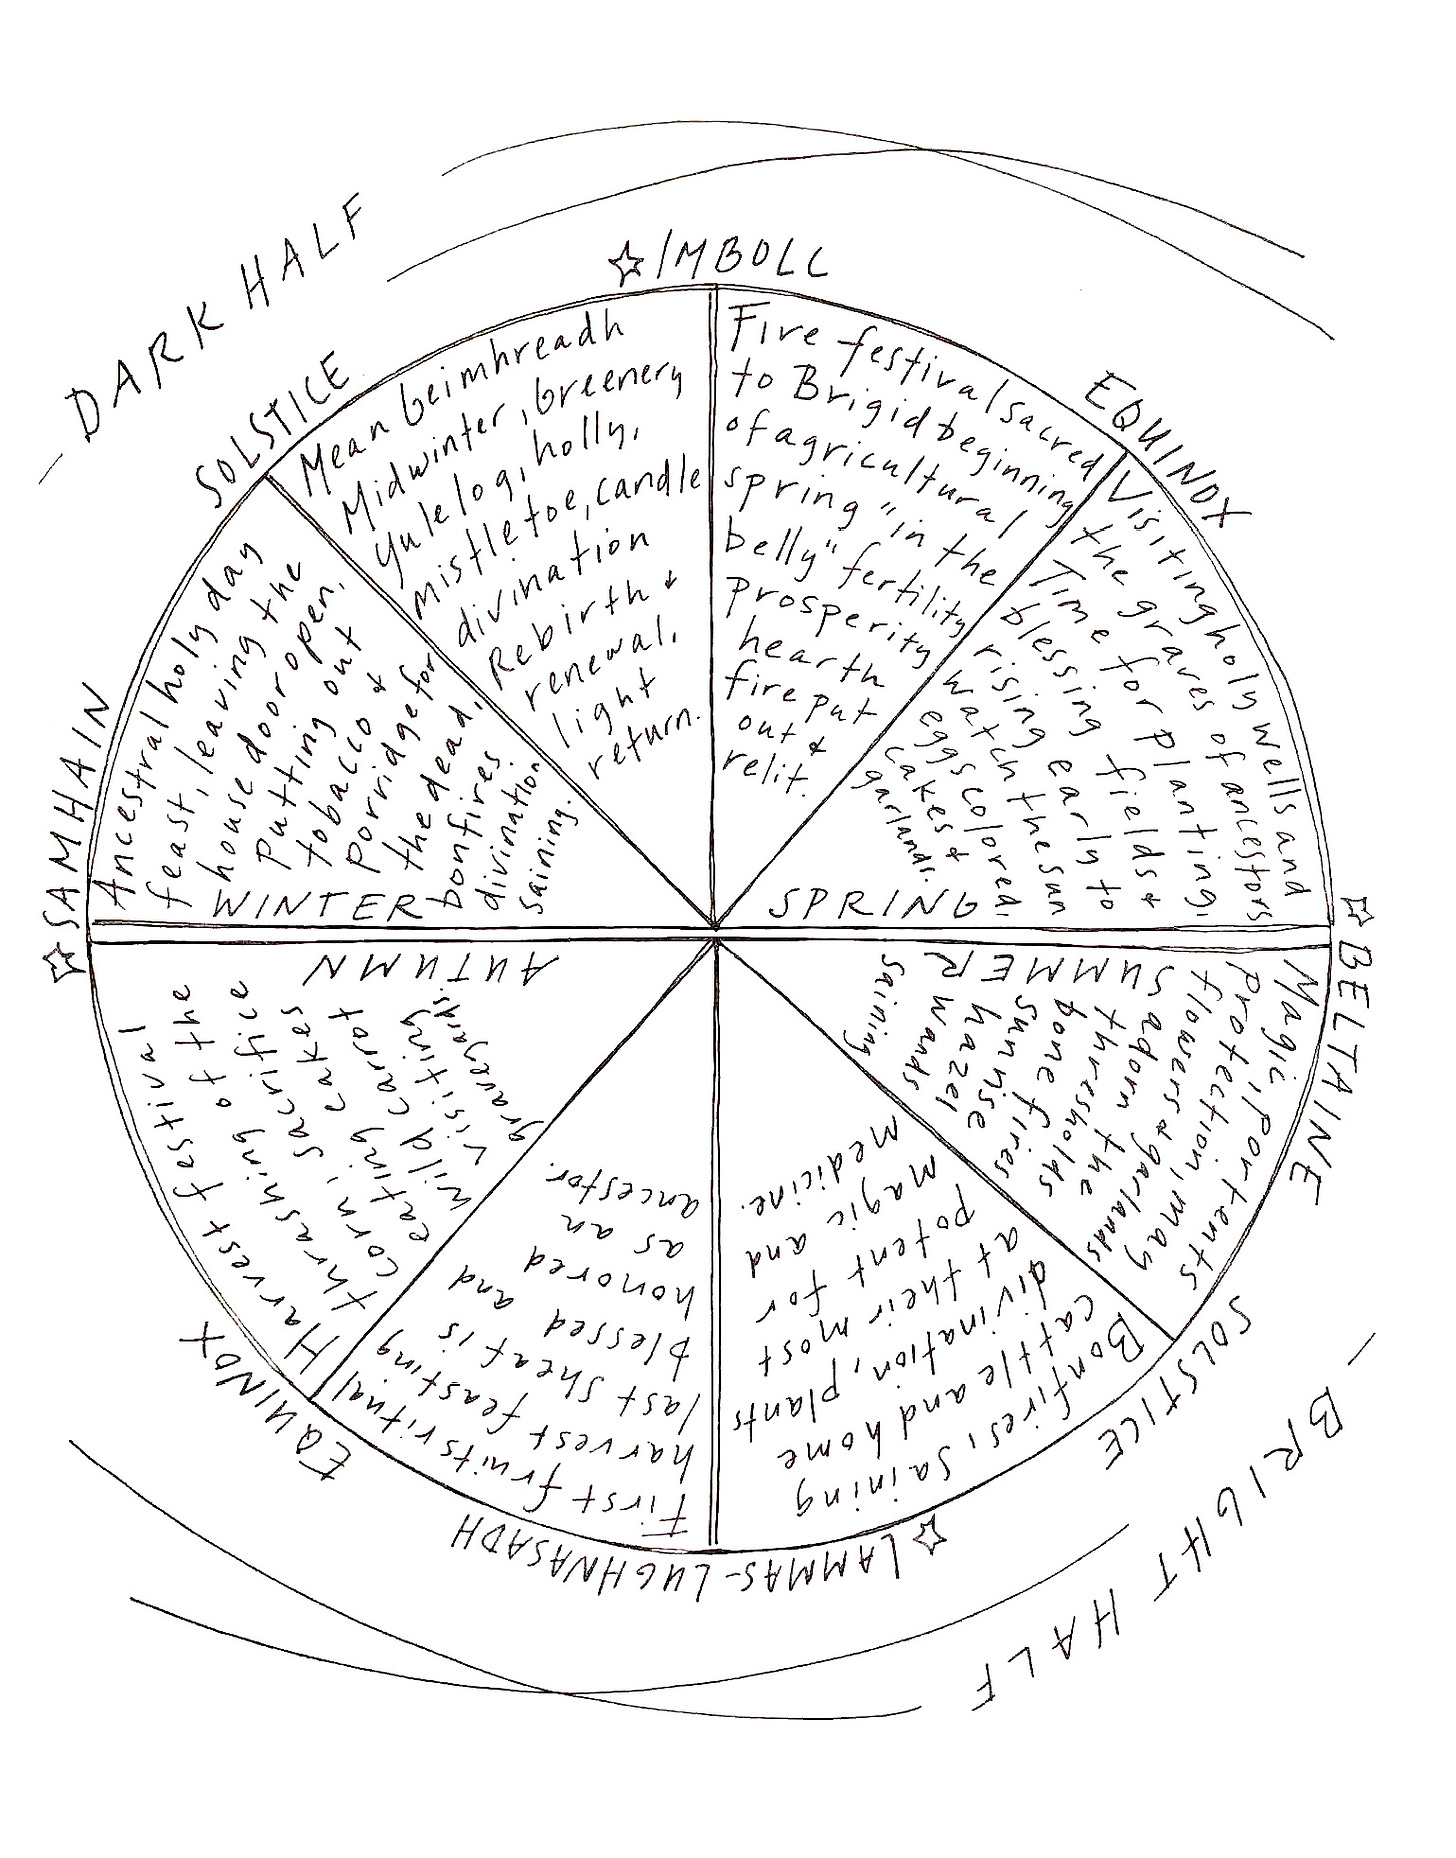 Illustration of the Celtic wheel of the year in black and white with the quarters stating simple practices for each season.